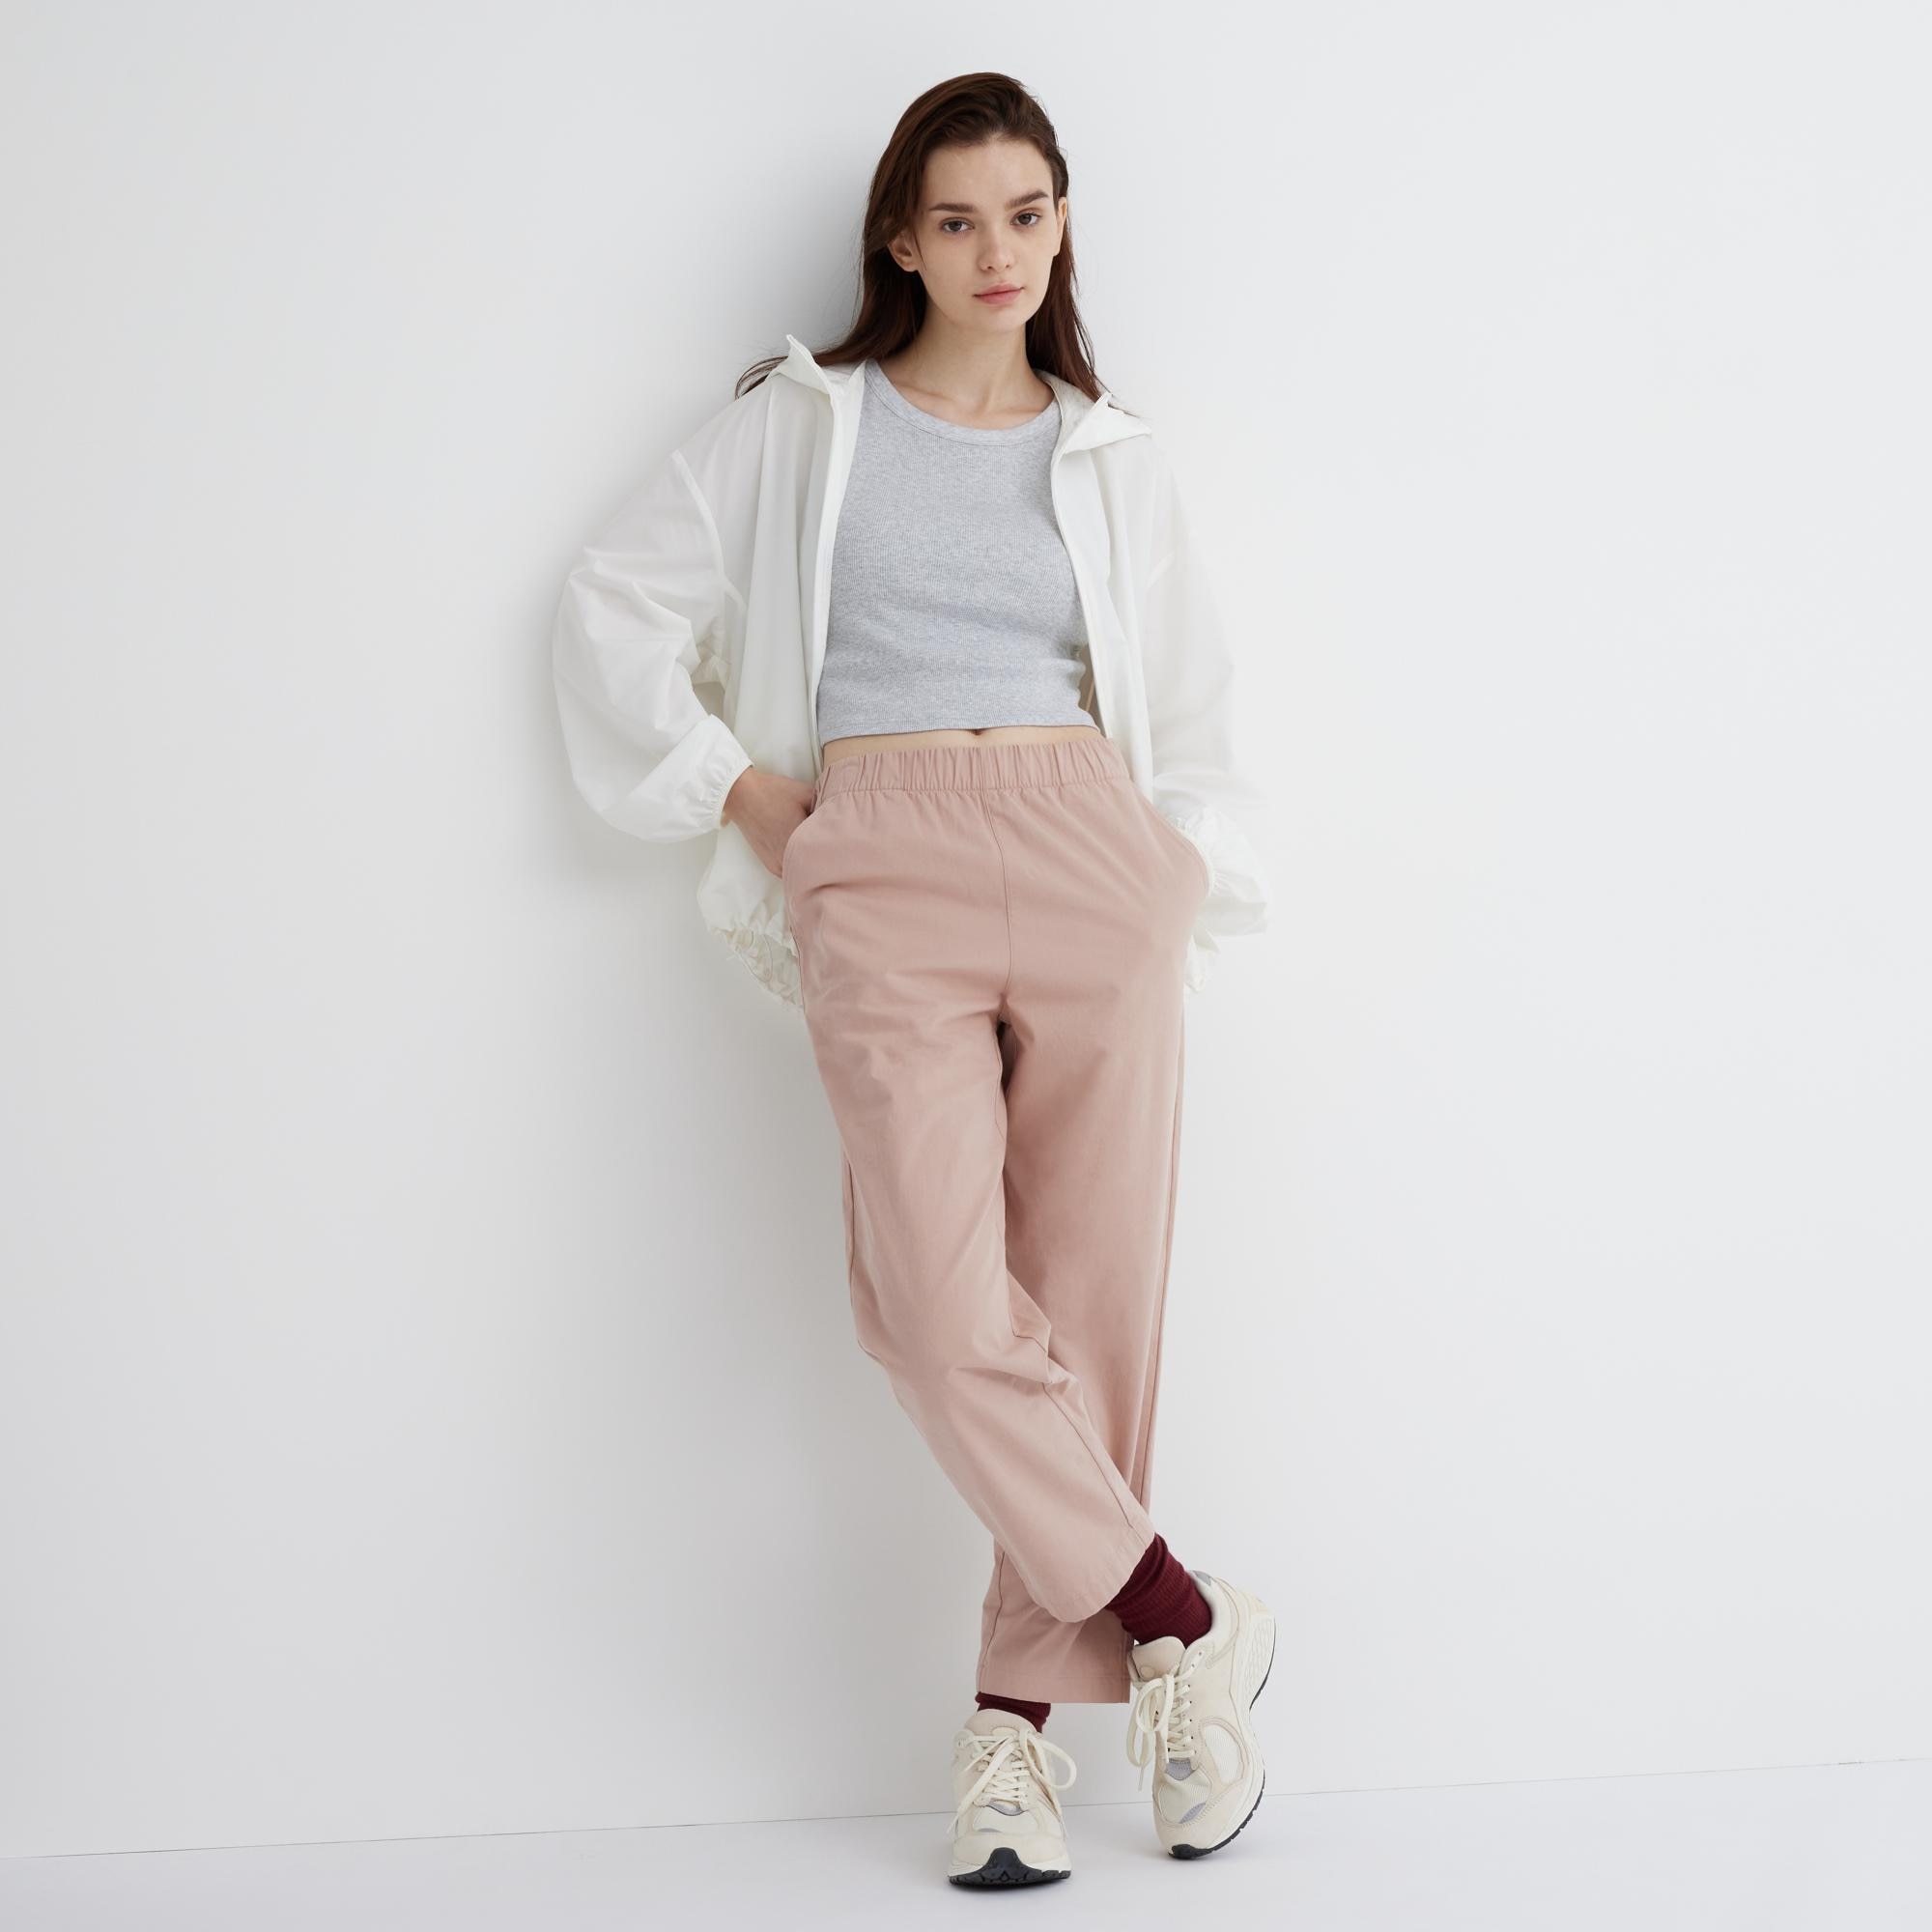 Two Ways to Wear Silky Track Pants - YLF